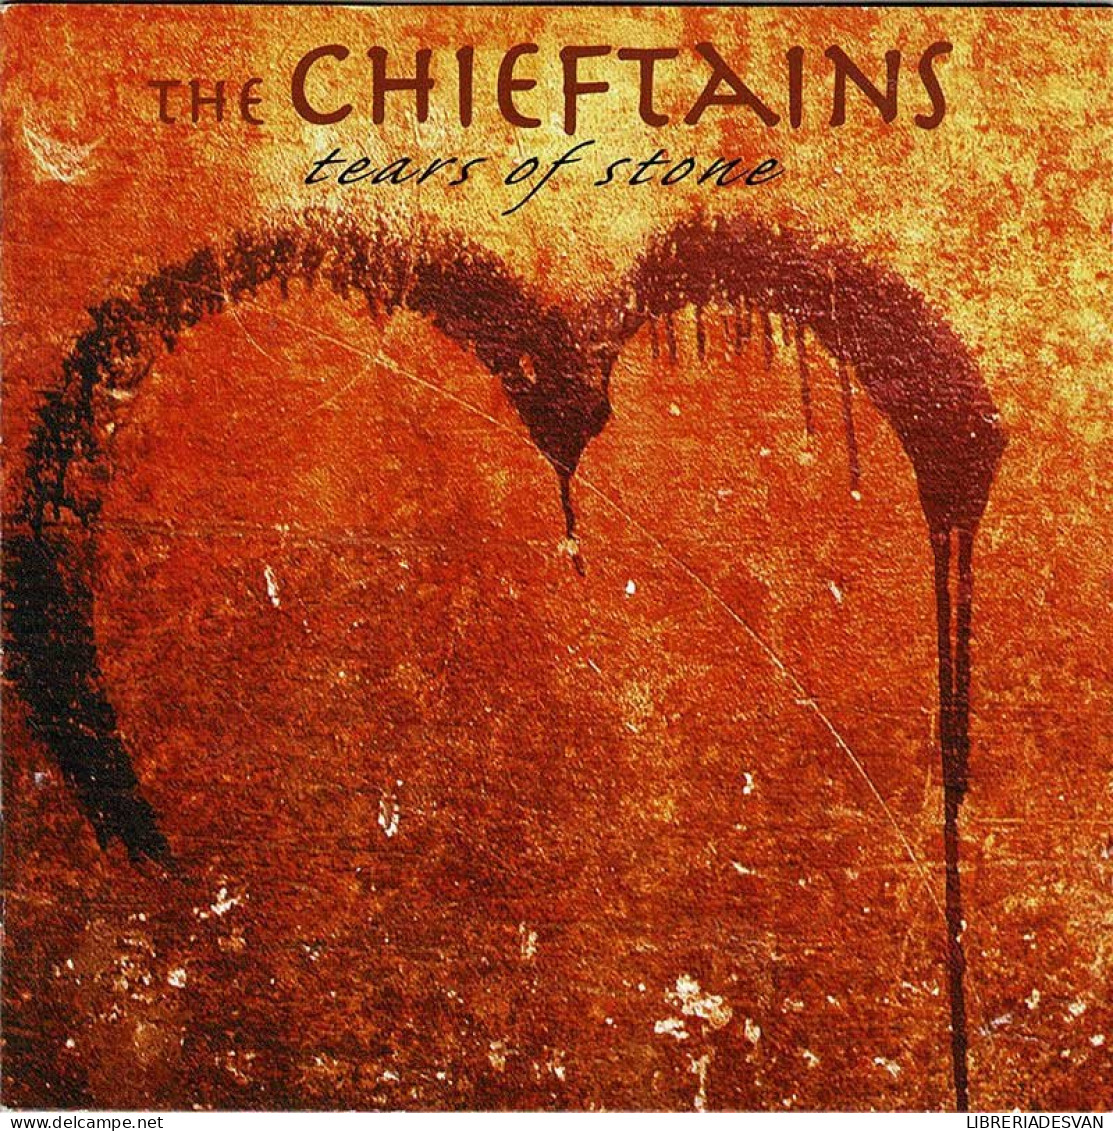 The Chieftains - Tears Of Stone. CD - Country & Folk